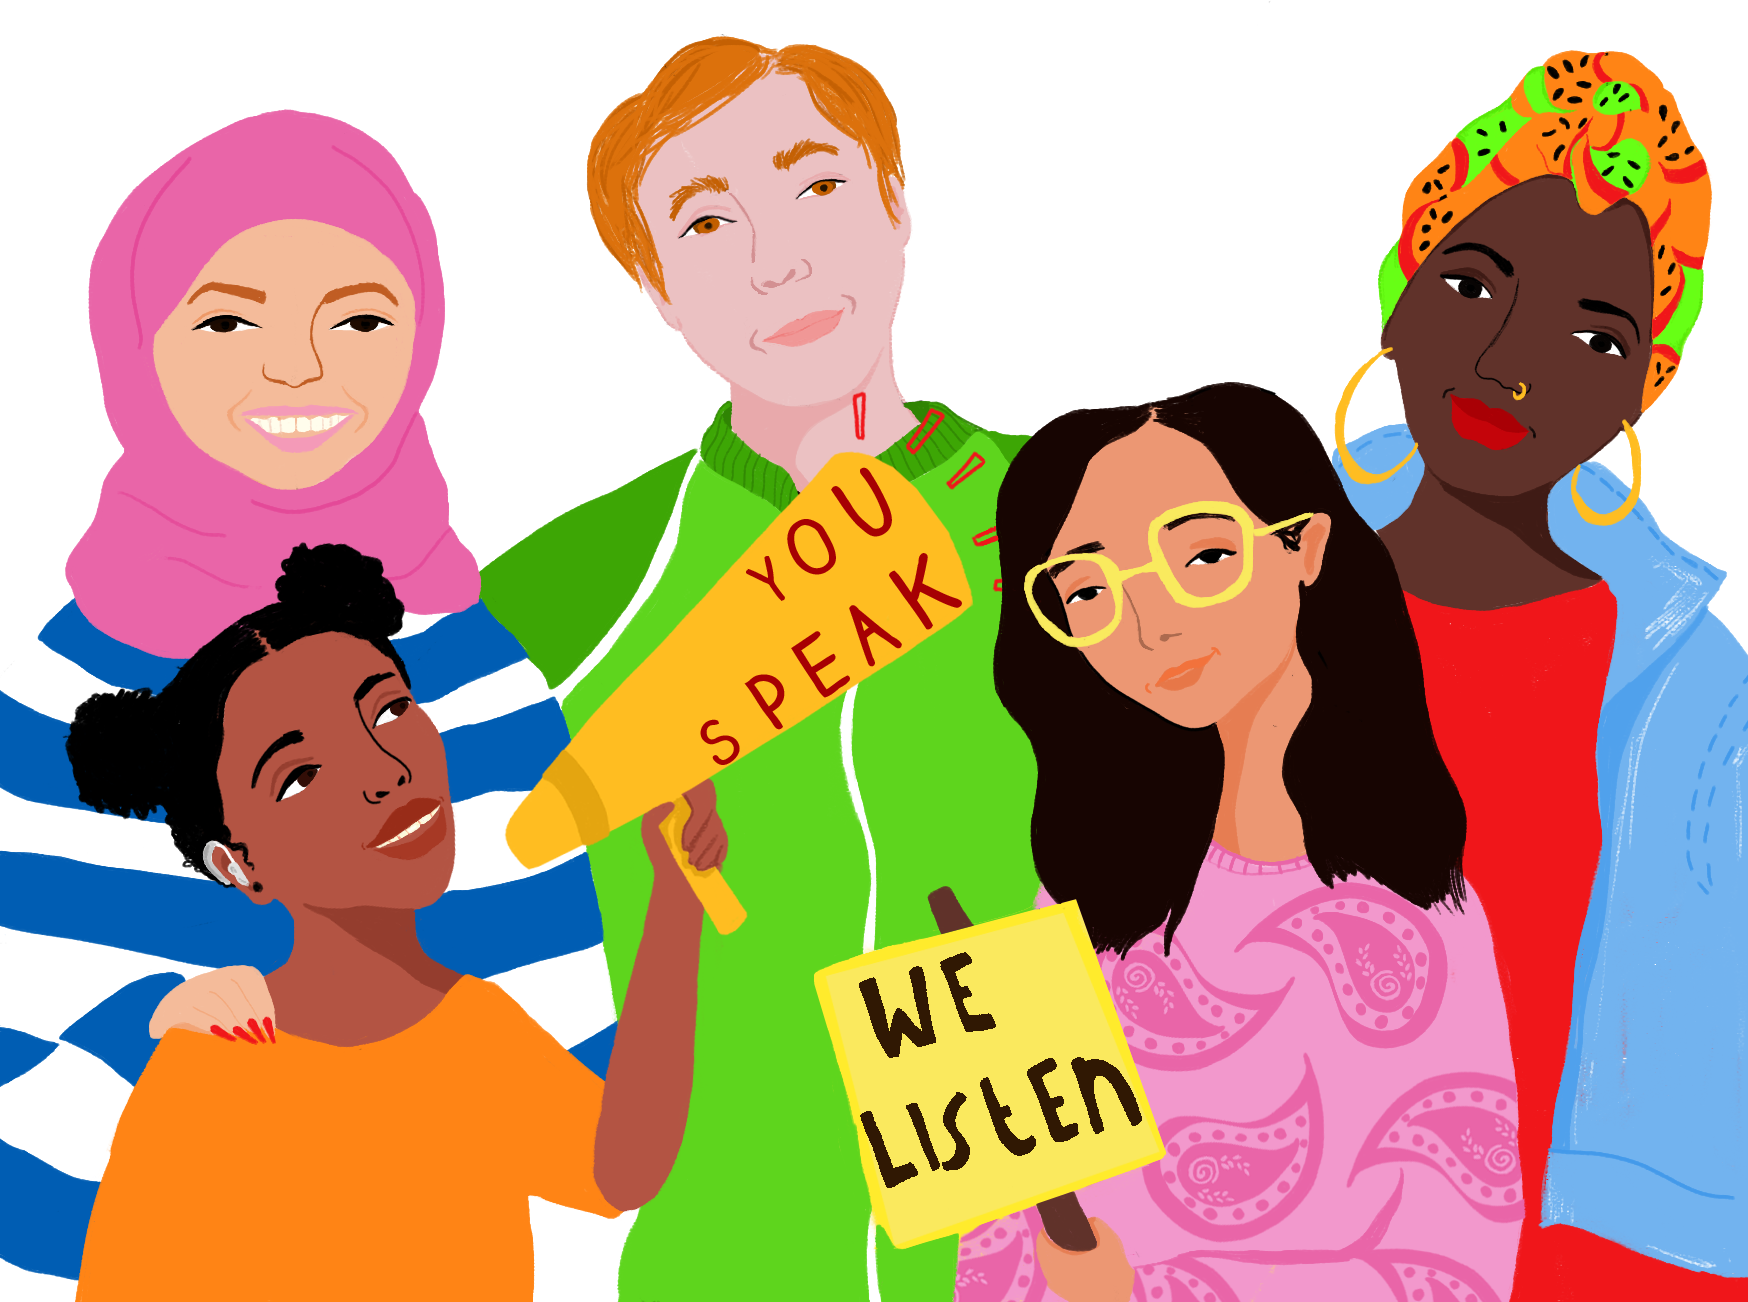 a colourful drawing of a diverse group of young people with different ethnicities, gendered and abilities. They are holding a megaphone which says 'you speak' and a banner which says 'we listen'